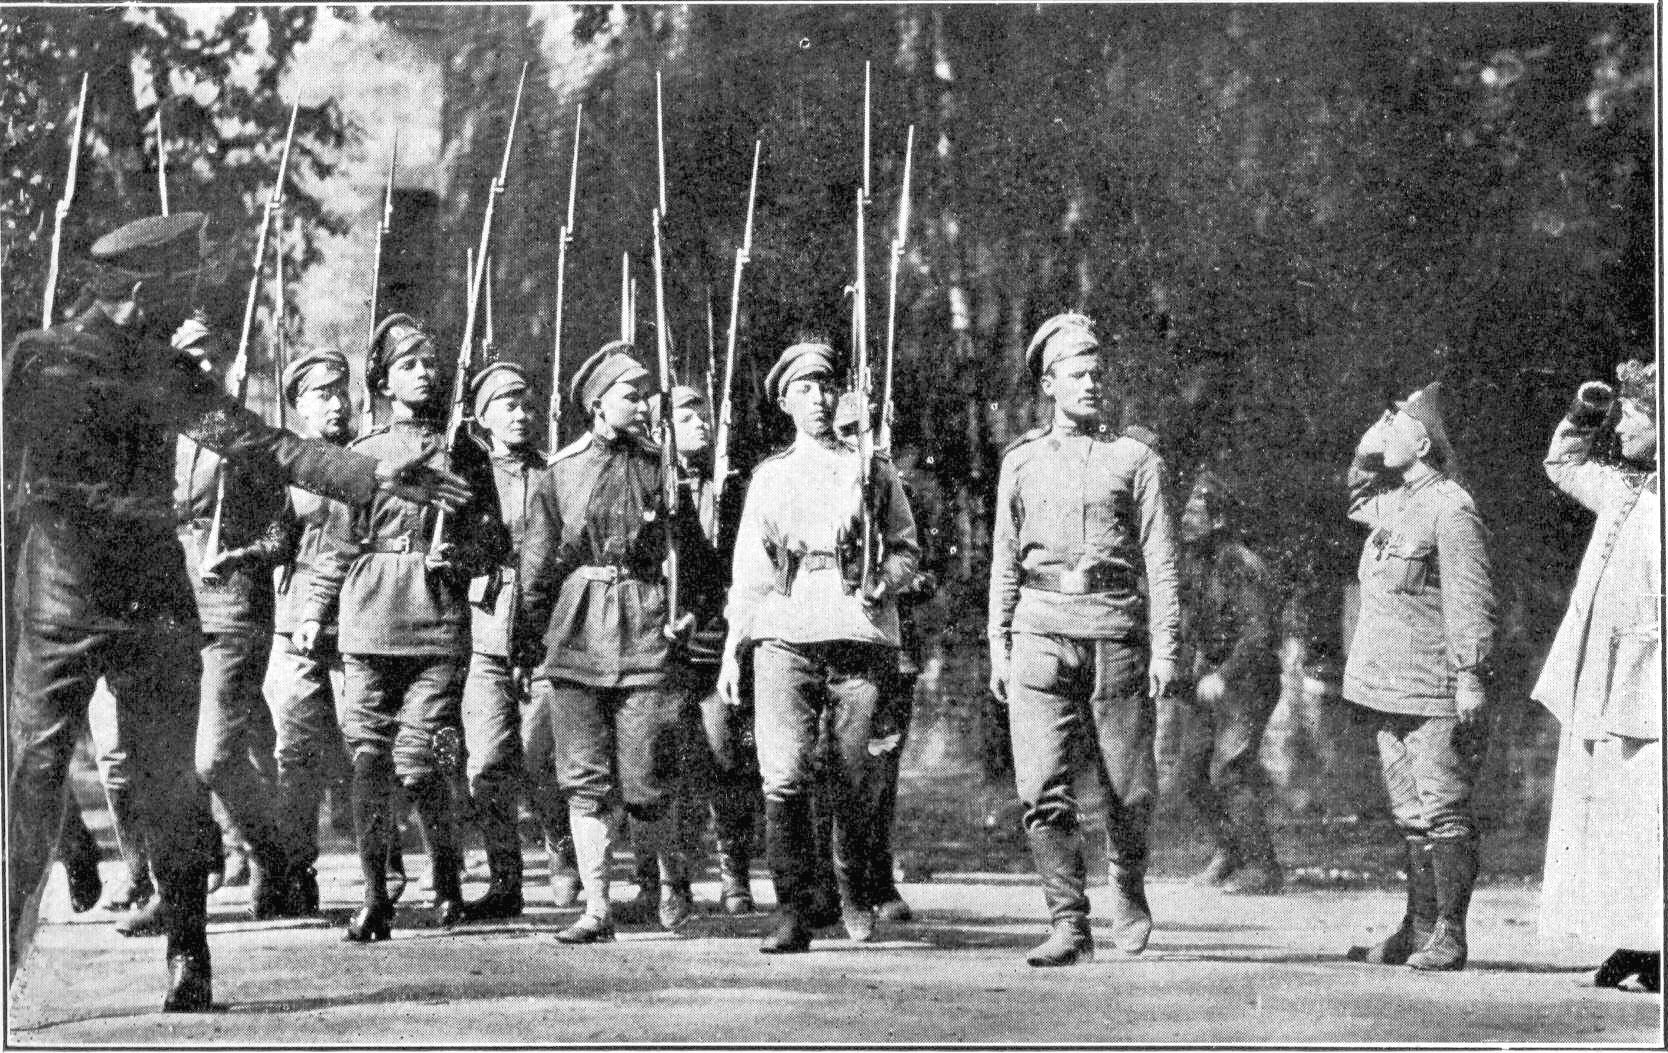 British suffragette Emmaline Pankhurst (far right) salutes the women of the Battalion of Death as they parade before going off to the front. They led the charge that broke the German lines.